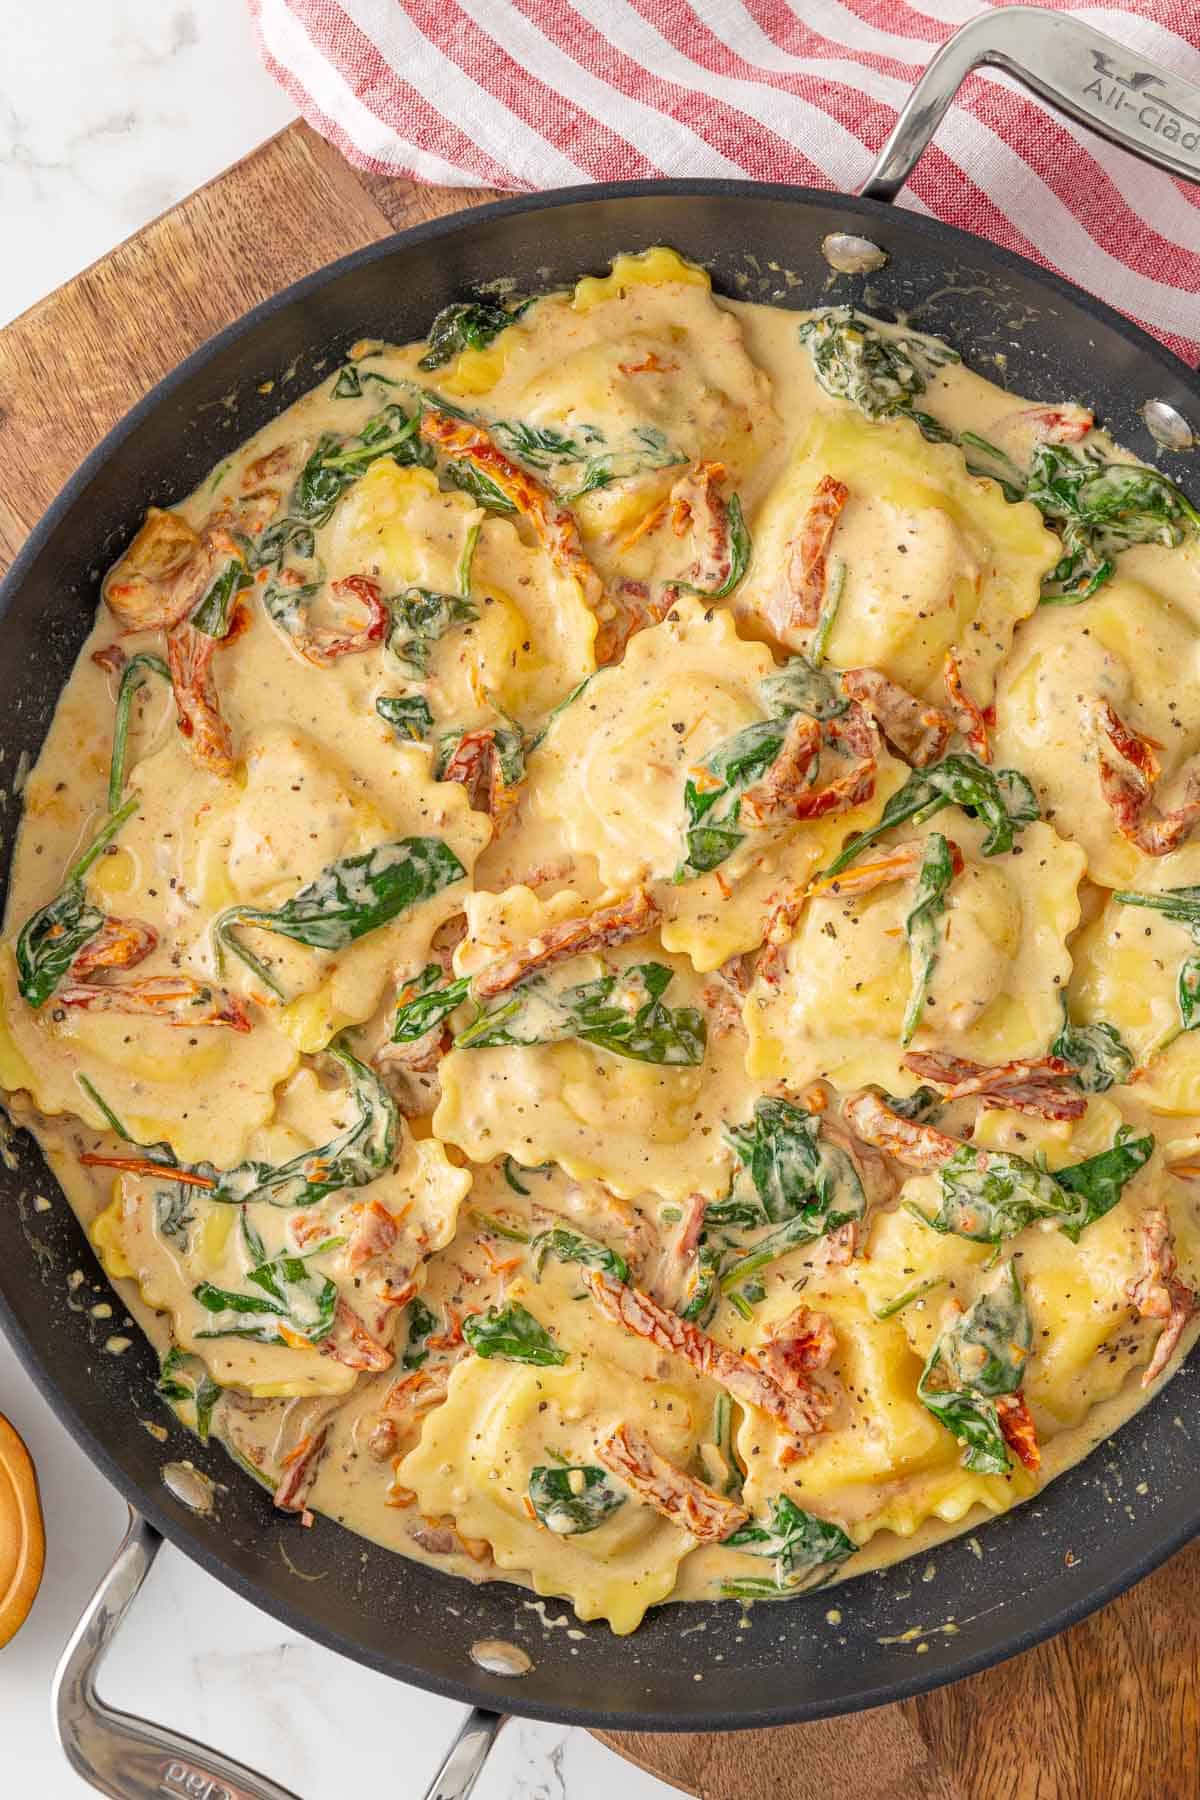 Cheese ravioli in a Tuscan cream sauce in a skillet.